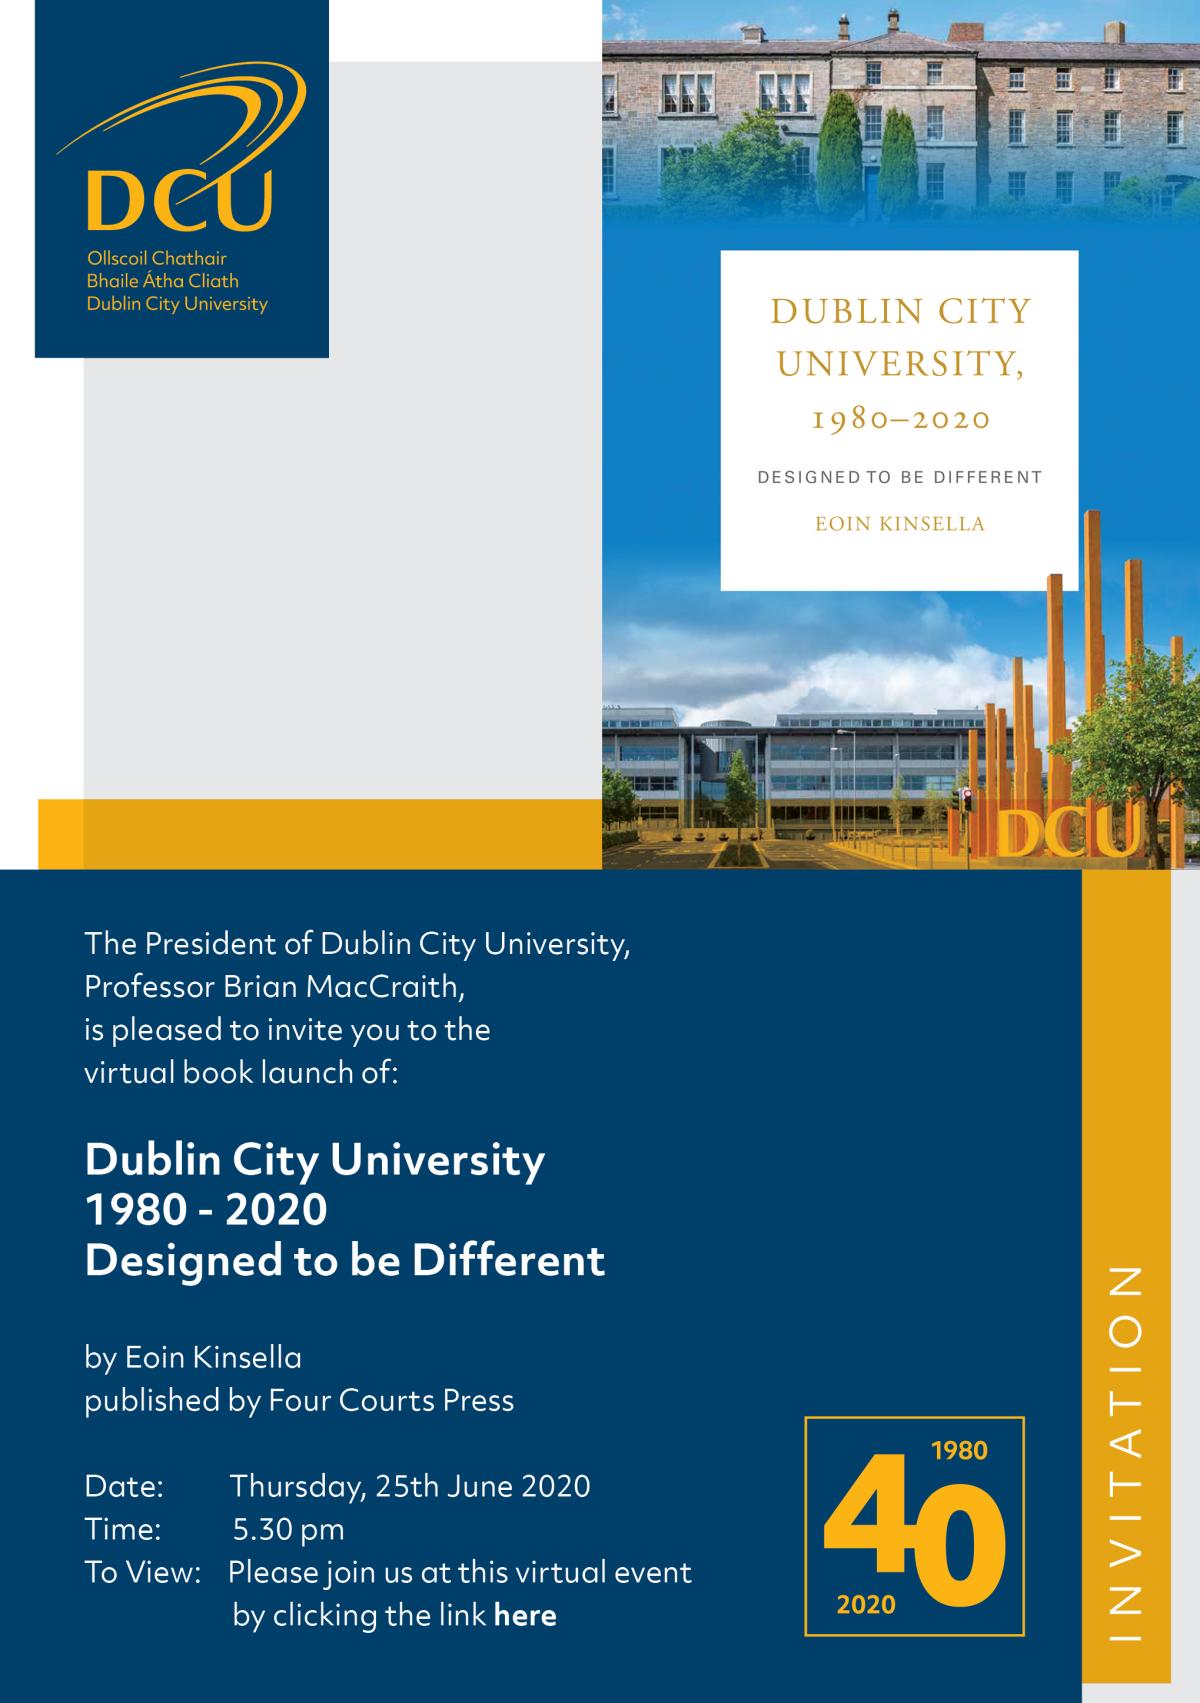 DCU virtual book launch of 'Dublin City University 1980-2020, Designed to be Different'